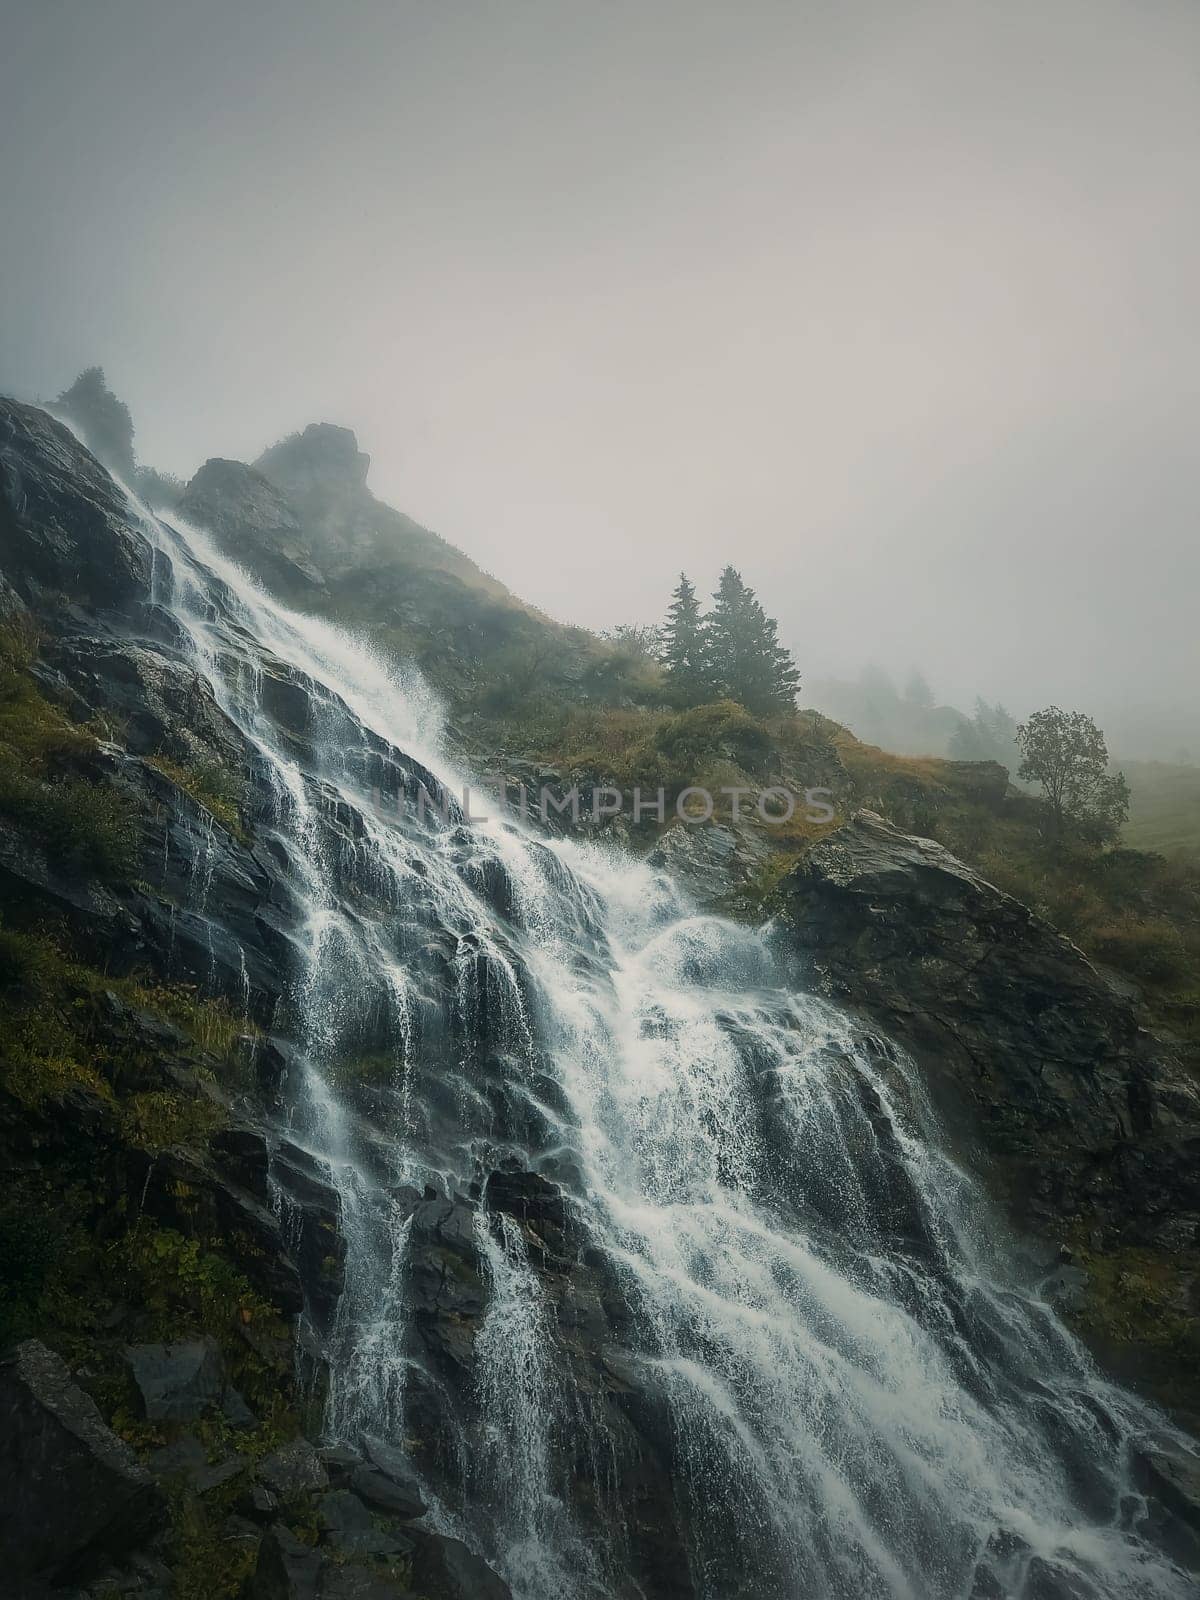 Capra waterfall on the Transfagarasan winding route of Carpathian mountains, Romania. Wonderful landscape with a tumultuous river flowing down through the cliffs in a foggy autumn morning by psychoshadow